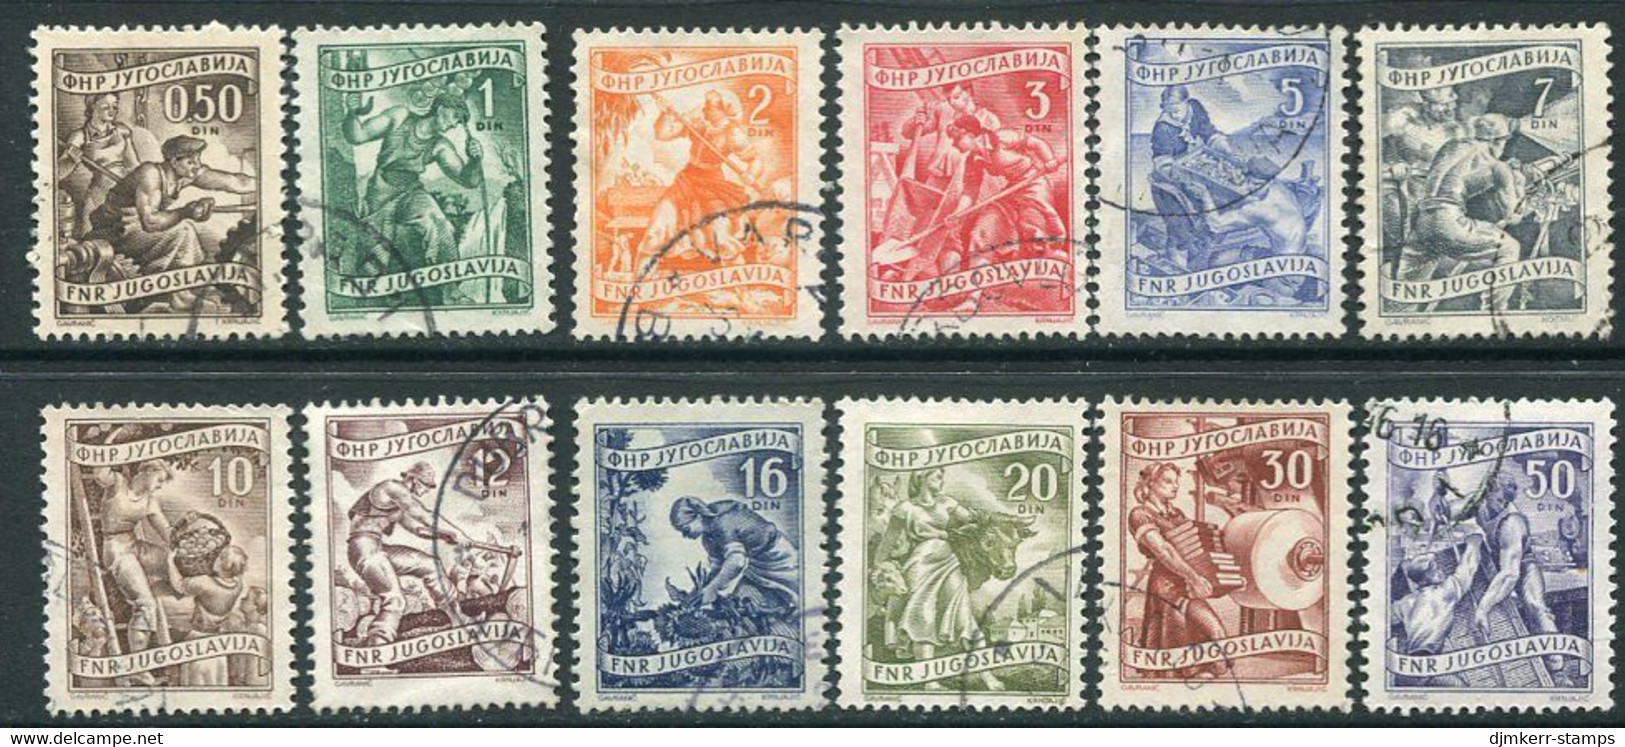 YUGOSLAVIA 1950 Occupations Definitive Used.  Michel 628-39 - Used Stamps